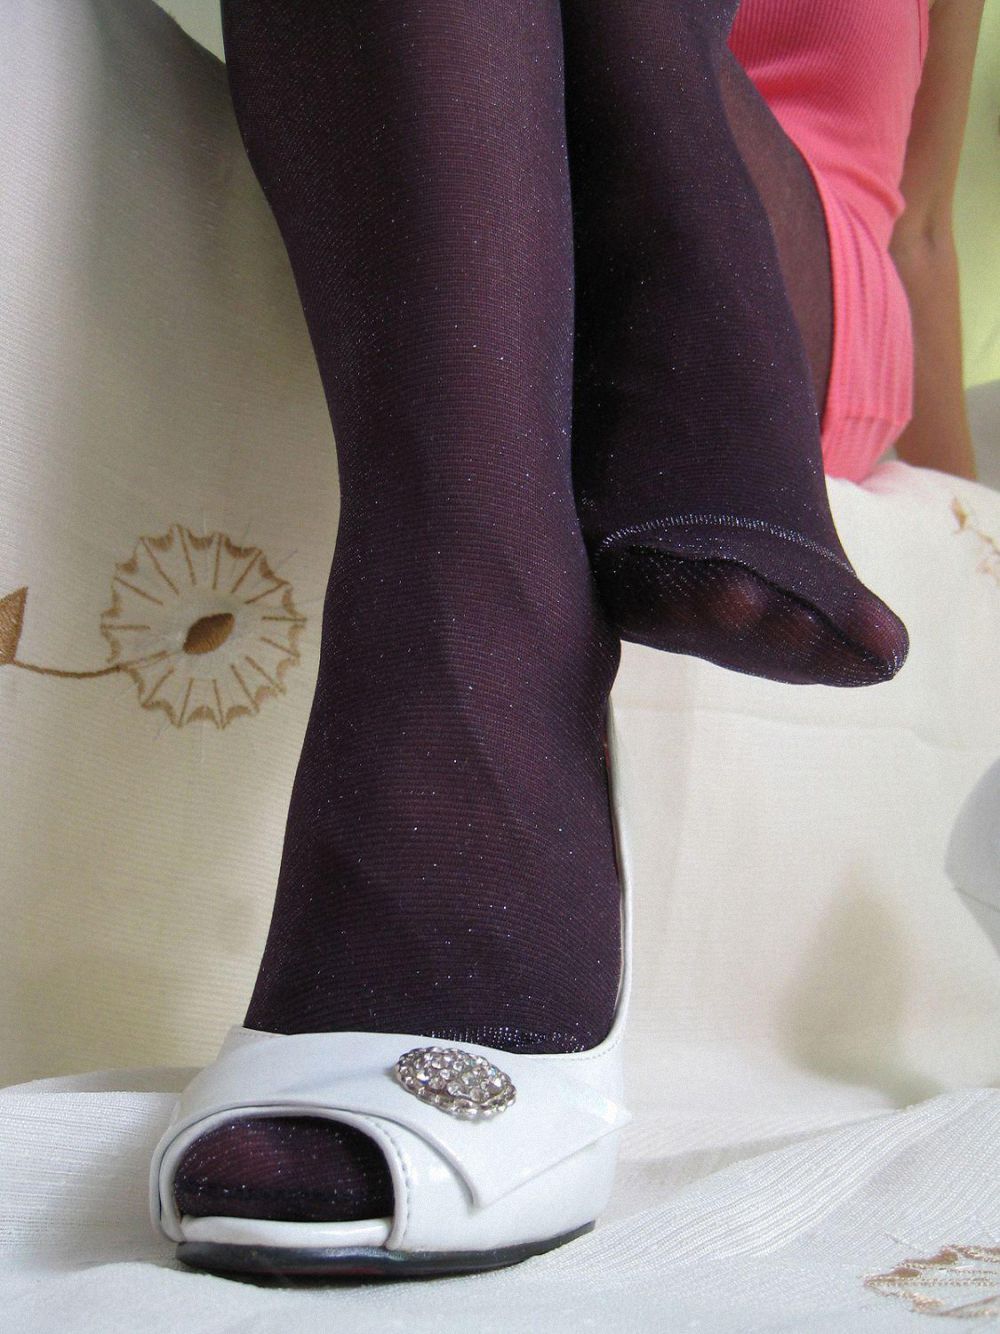 [online collection] 2013.11.23 tempting grape purple stockings